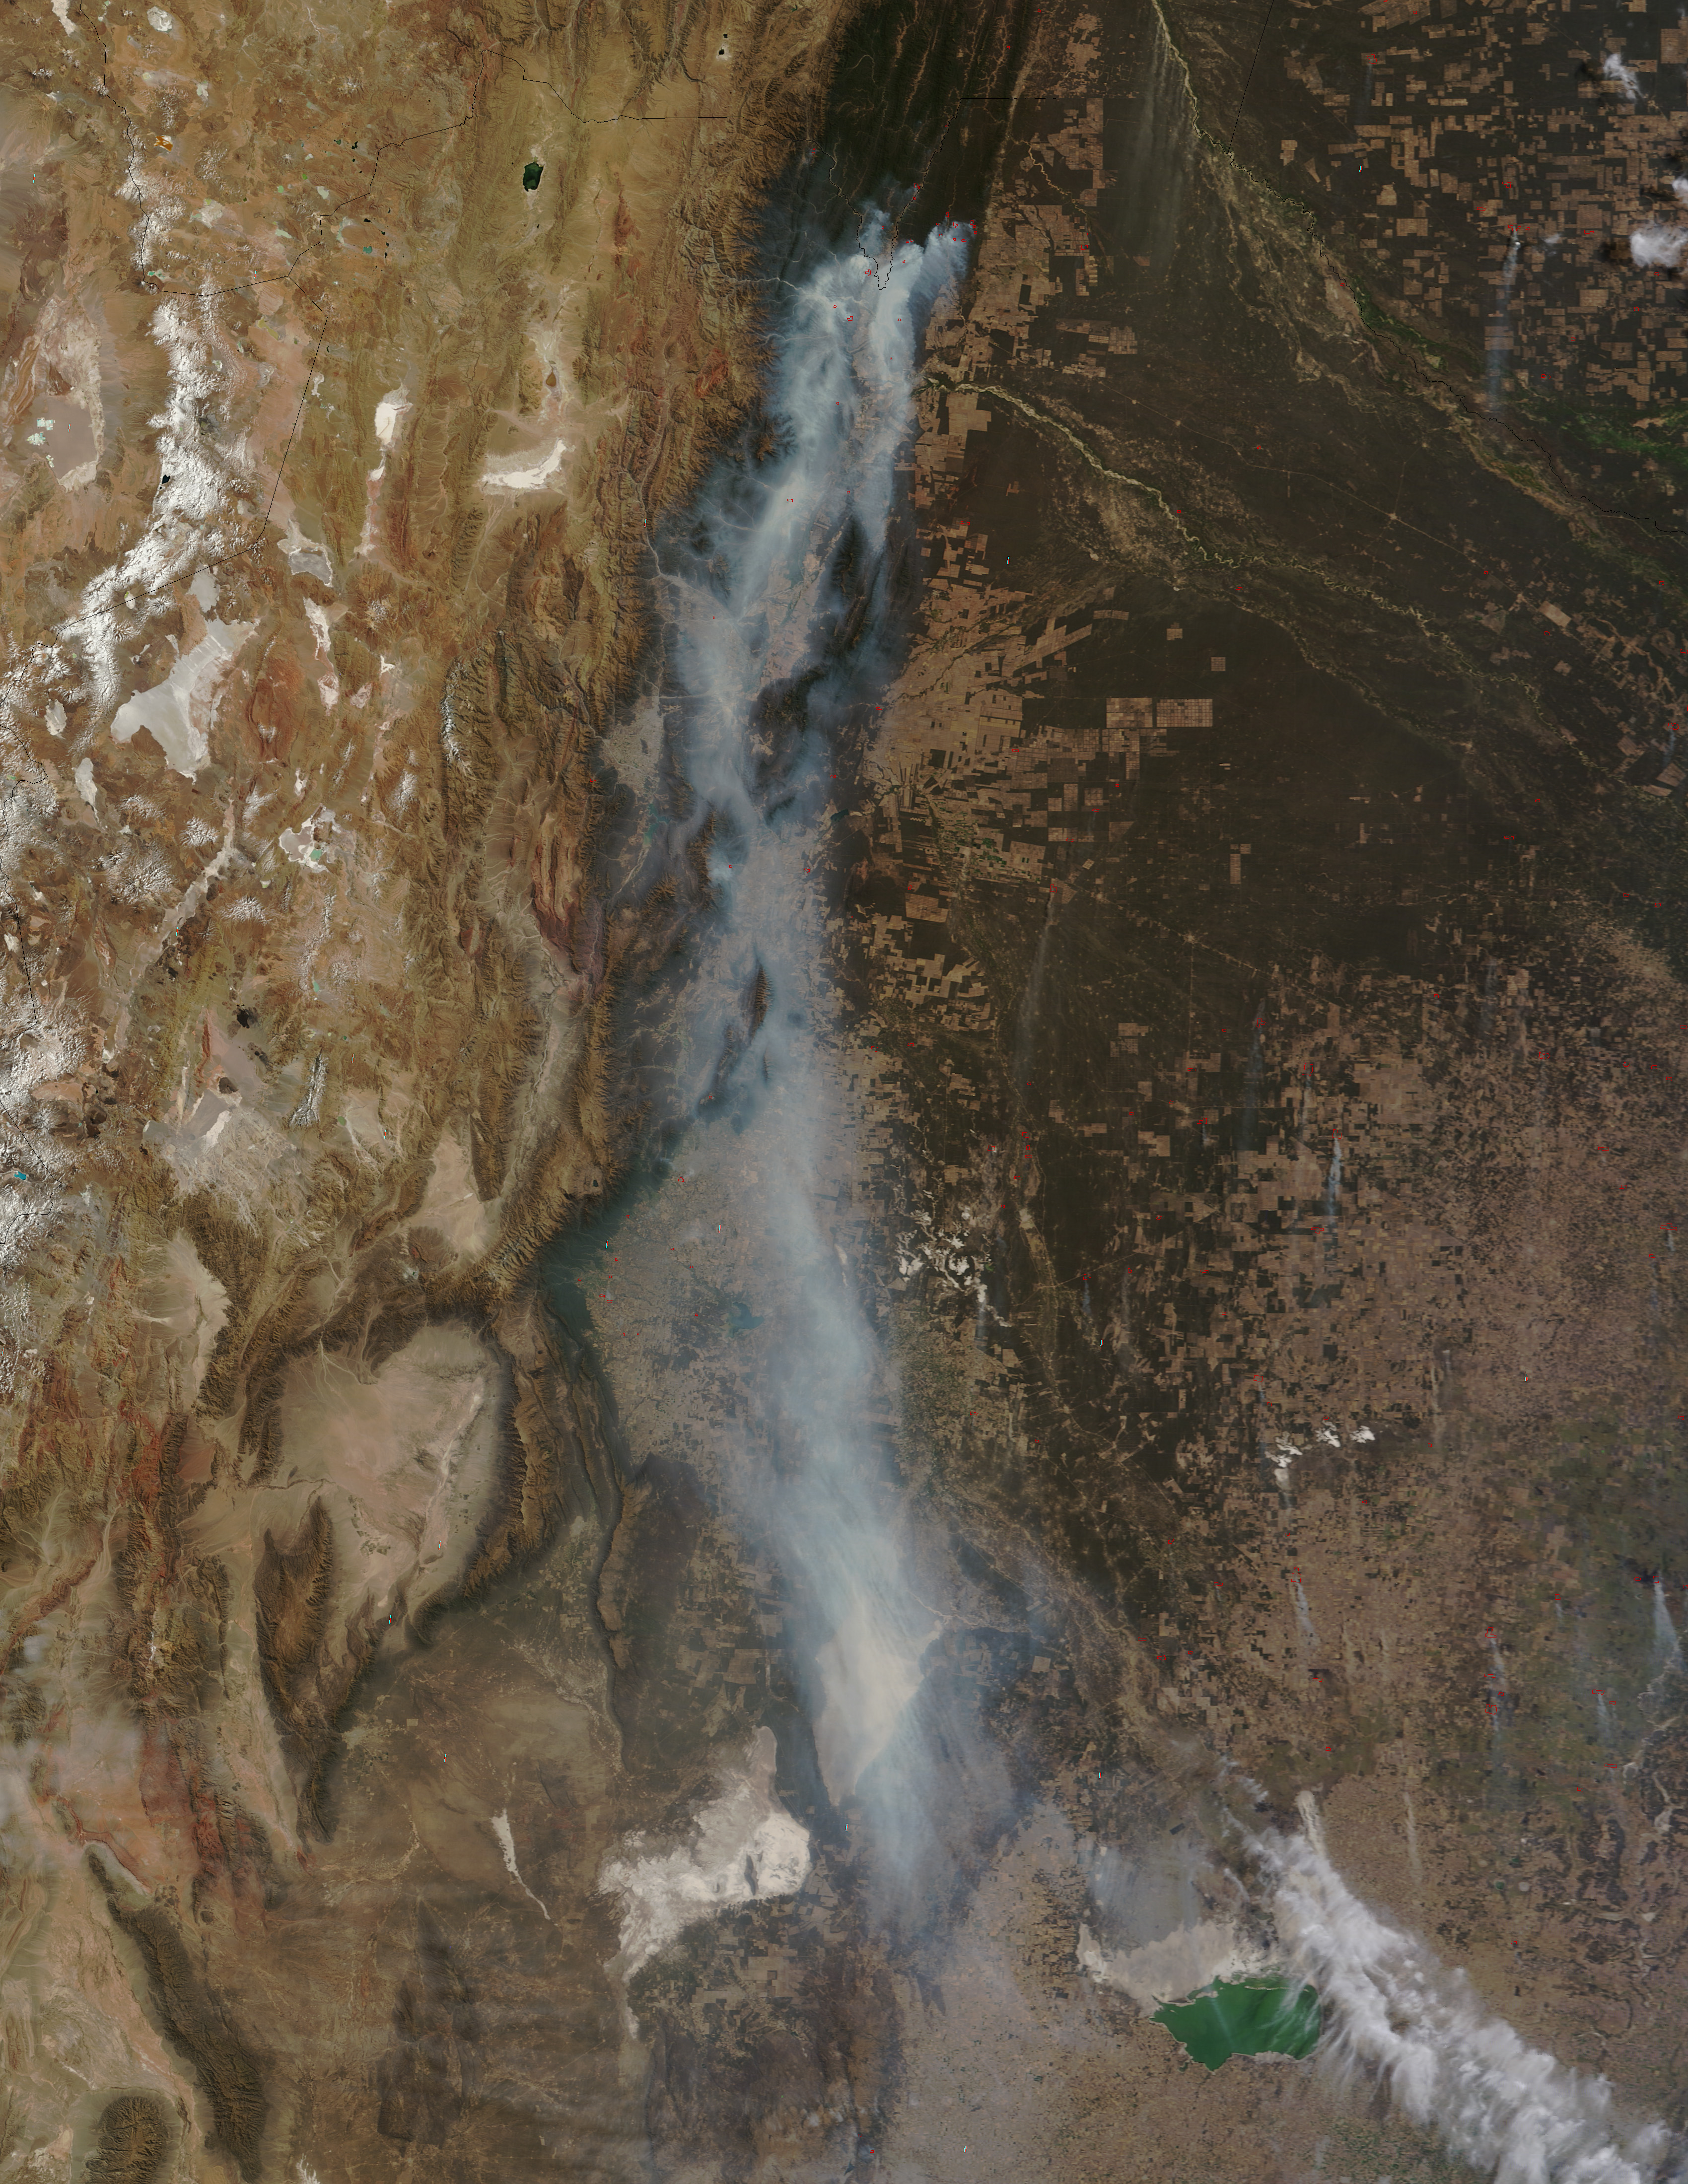 Fire, Dust Sweeps Across Northern Argentina - related image preview